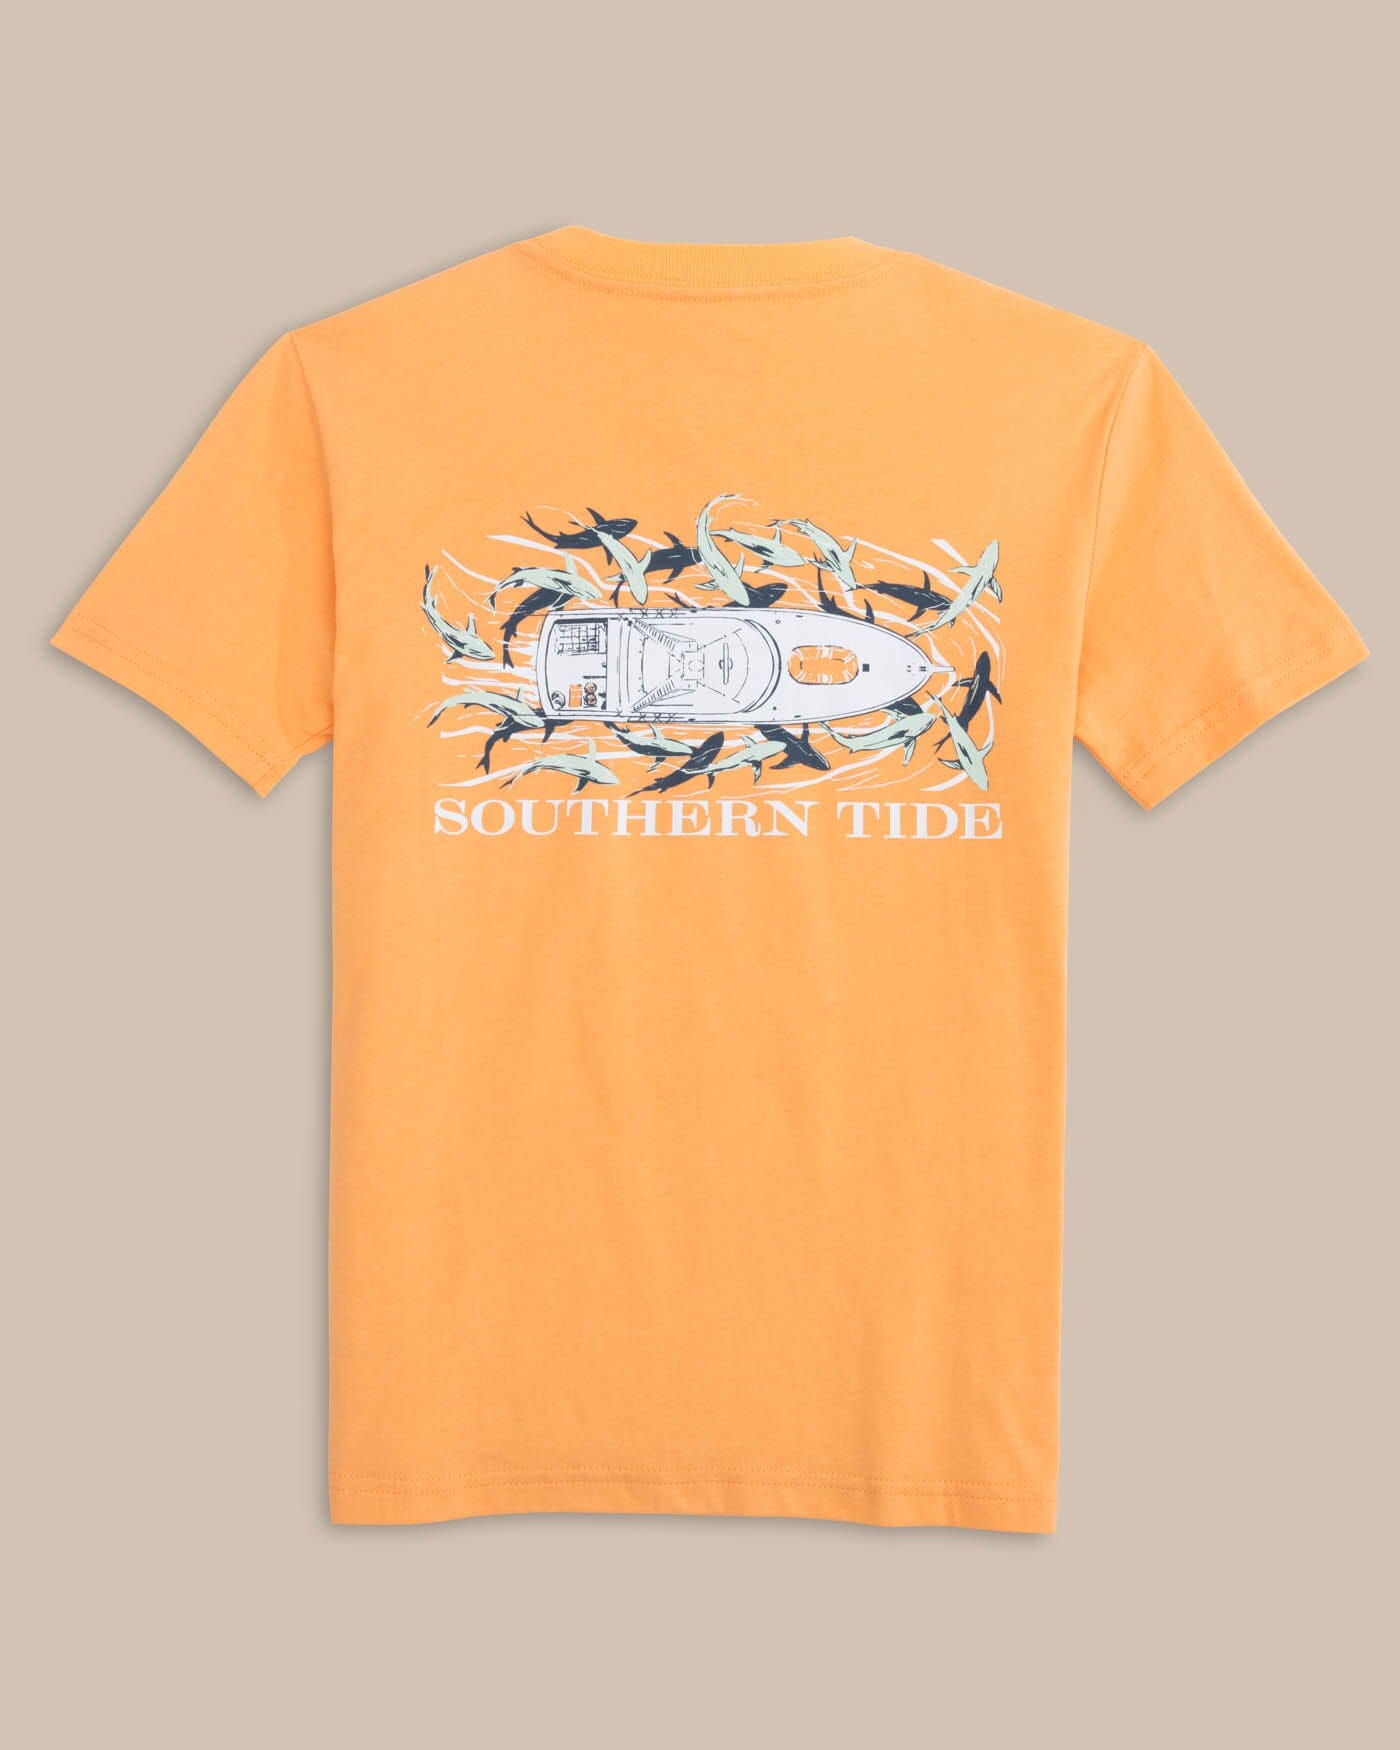 Southern Tide Short Sleeve Tops & T-Shirts for Boys Sizes 2T-5T